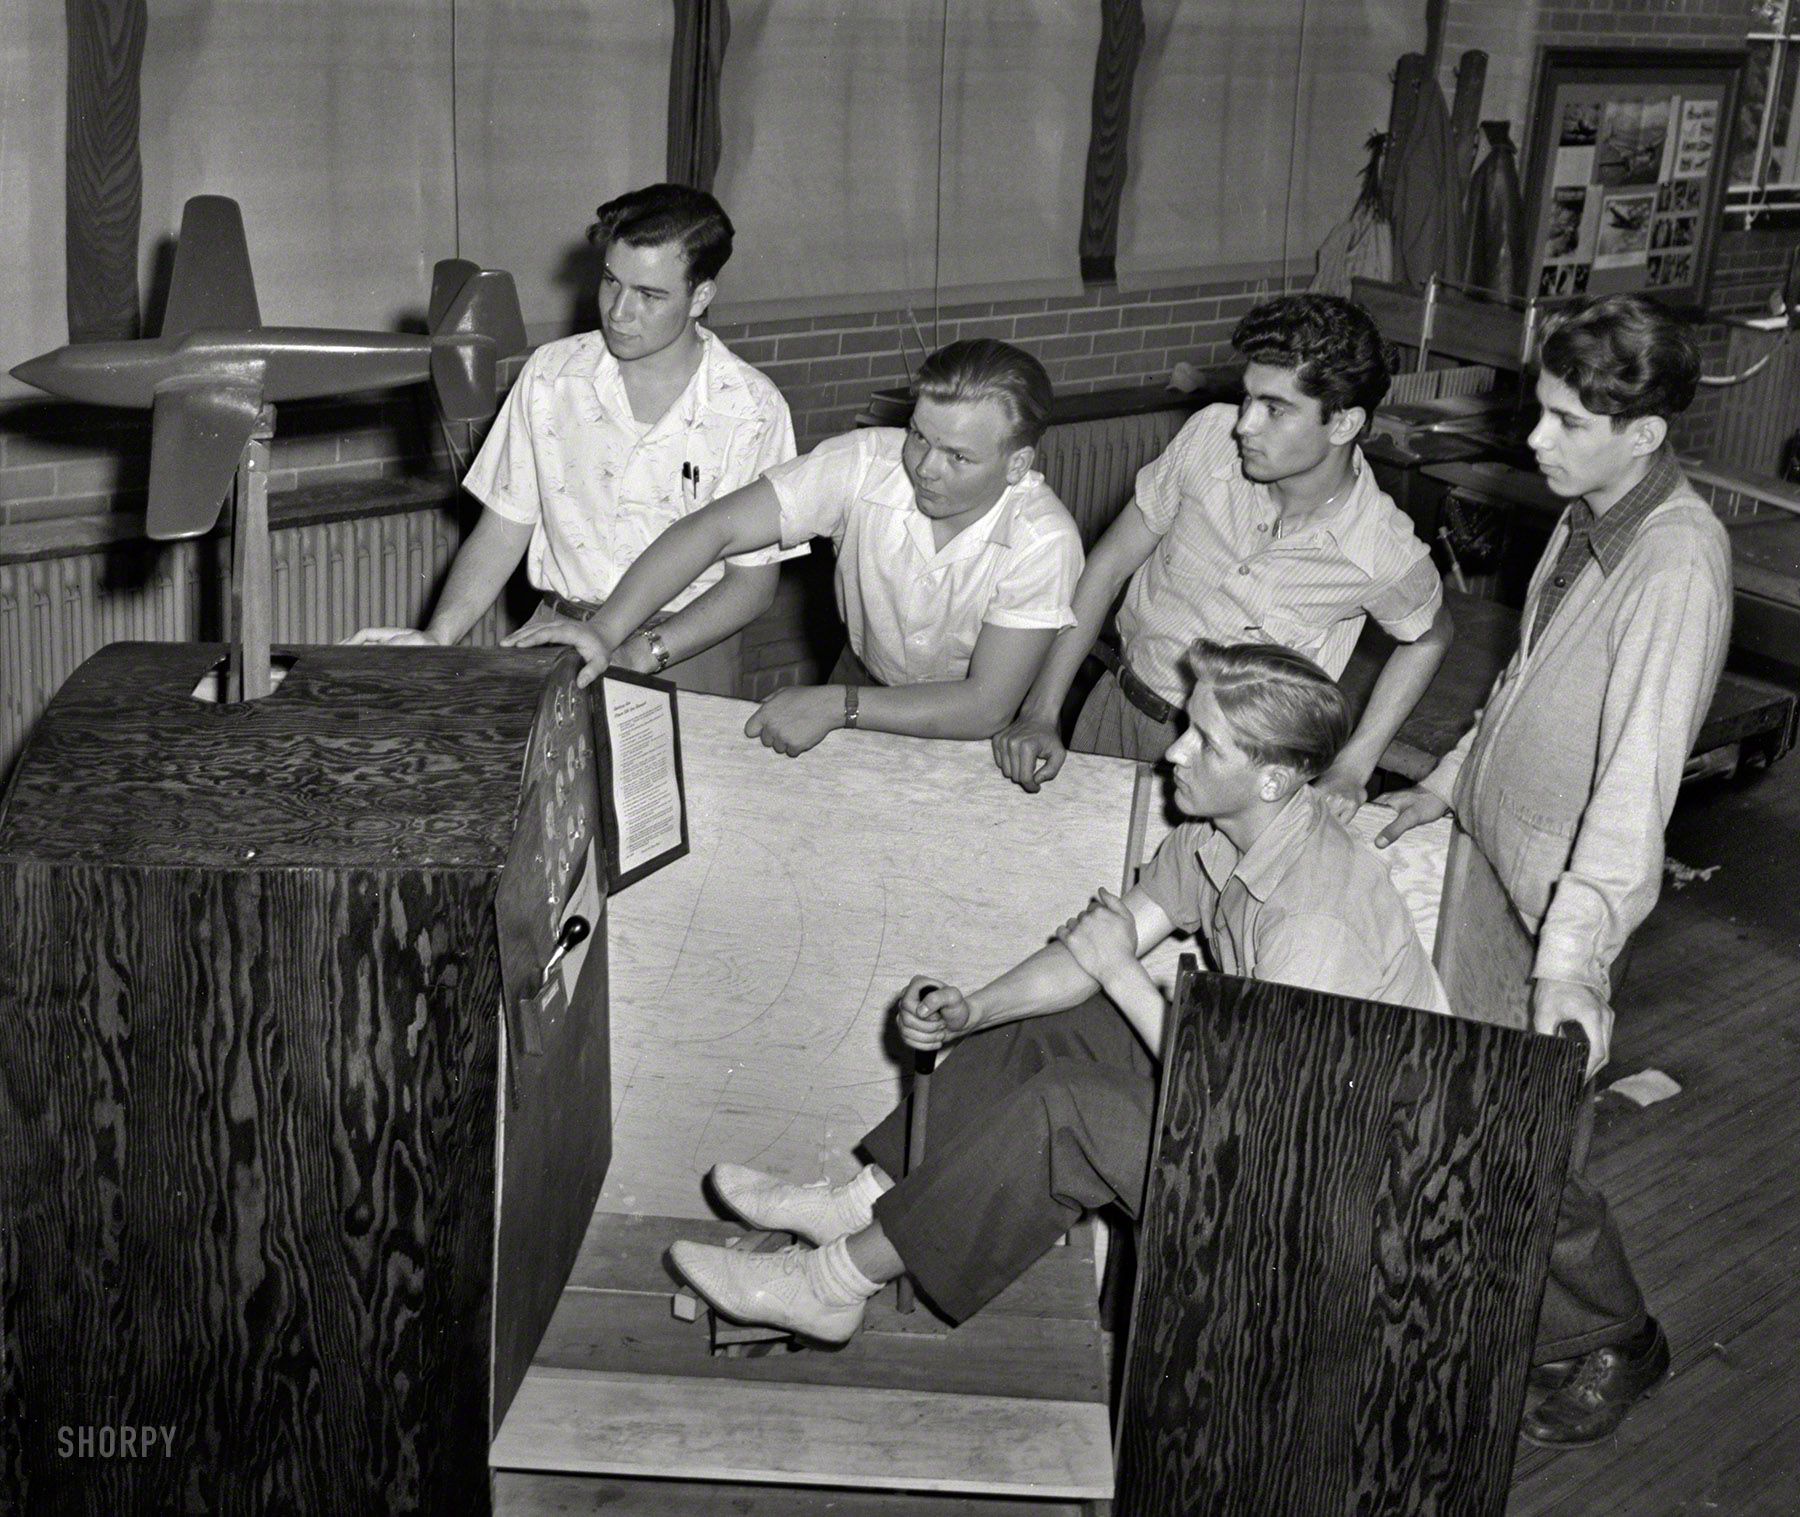 July 1942. "These high school boys constructed this trainer plane, and the young man holding the stick is operating it. Note the instruments and control board. This is one phase of the aviation course offered boys at the Weequahic High School in Newark, New Jersey." Text in the cockpit: "Getting the Plane Off the Ground." Office of War Information, photographer unknown. View full size.